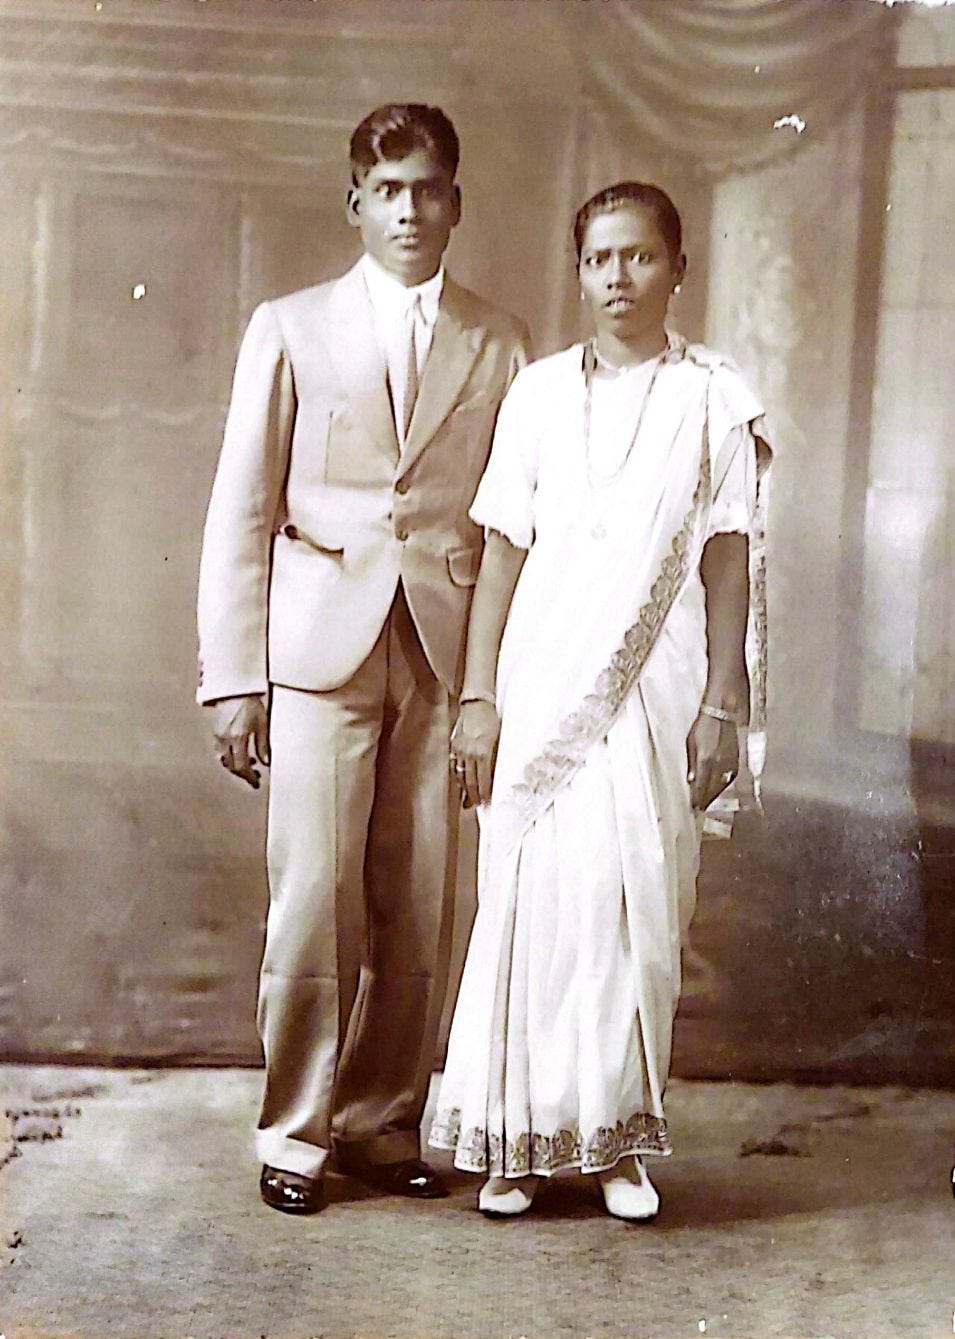 My paternal grandparents in Rangoon City, Burma, present-day Myanmar, when it was part of the Indian Empire under the control of the British East India Company, circa 1930.